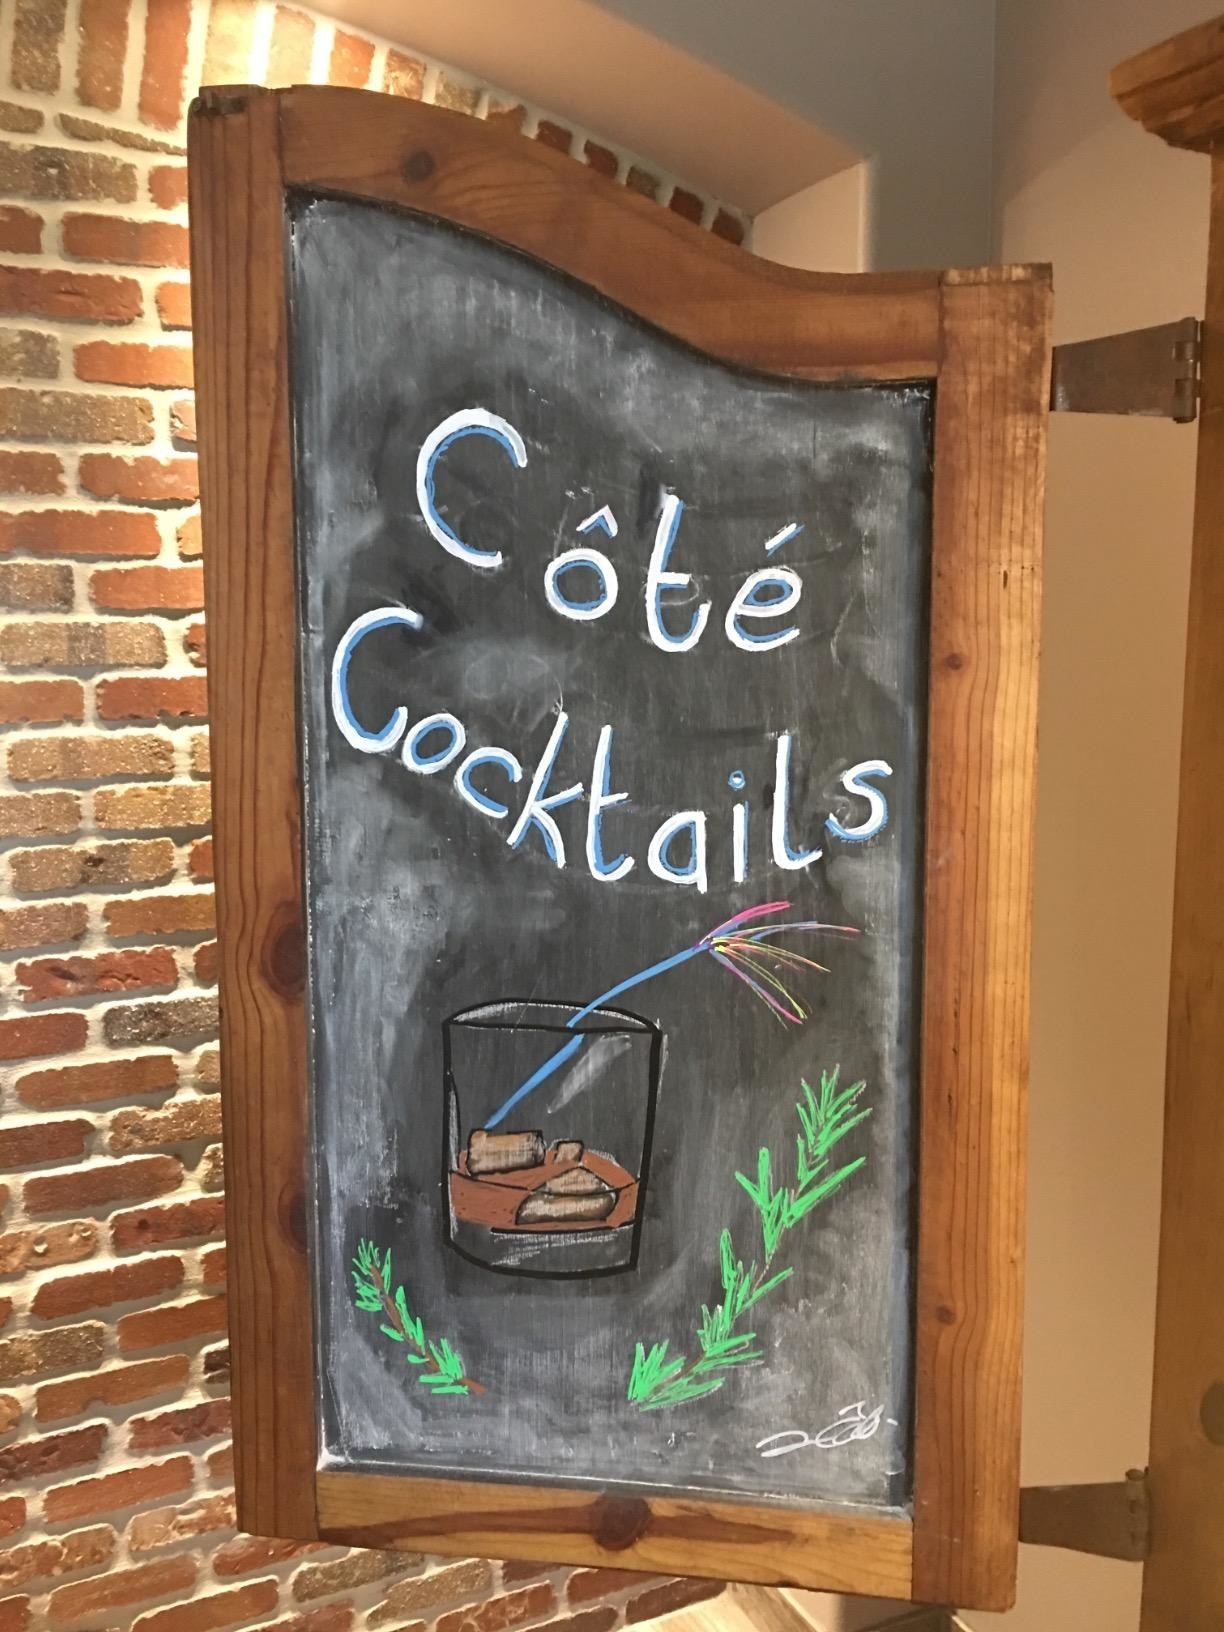 reviewer image of a door to an old TV unit they converted to a mini bar, using the chalkboard paint to turn the door into a chalkboard with a cocktail drawn on it and the words 'Côté Cocktails